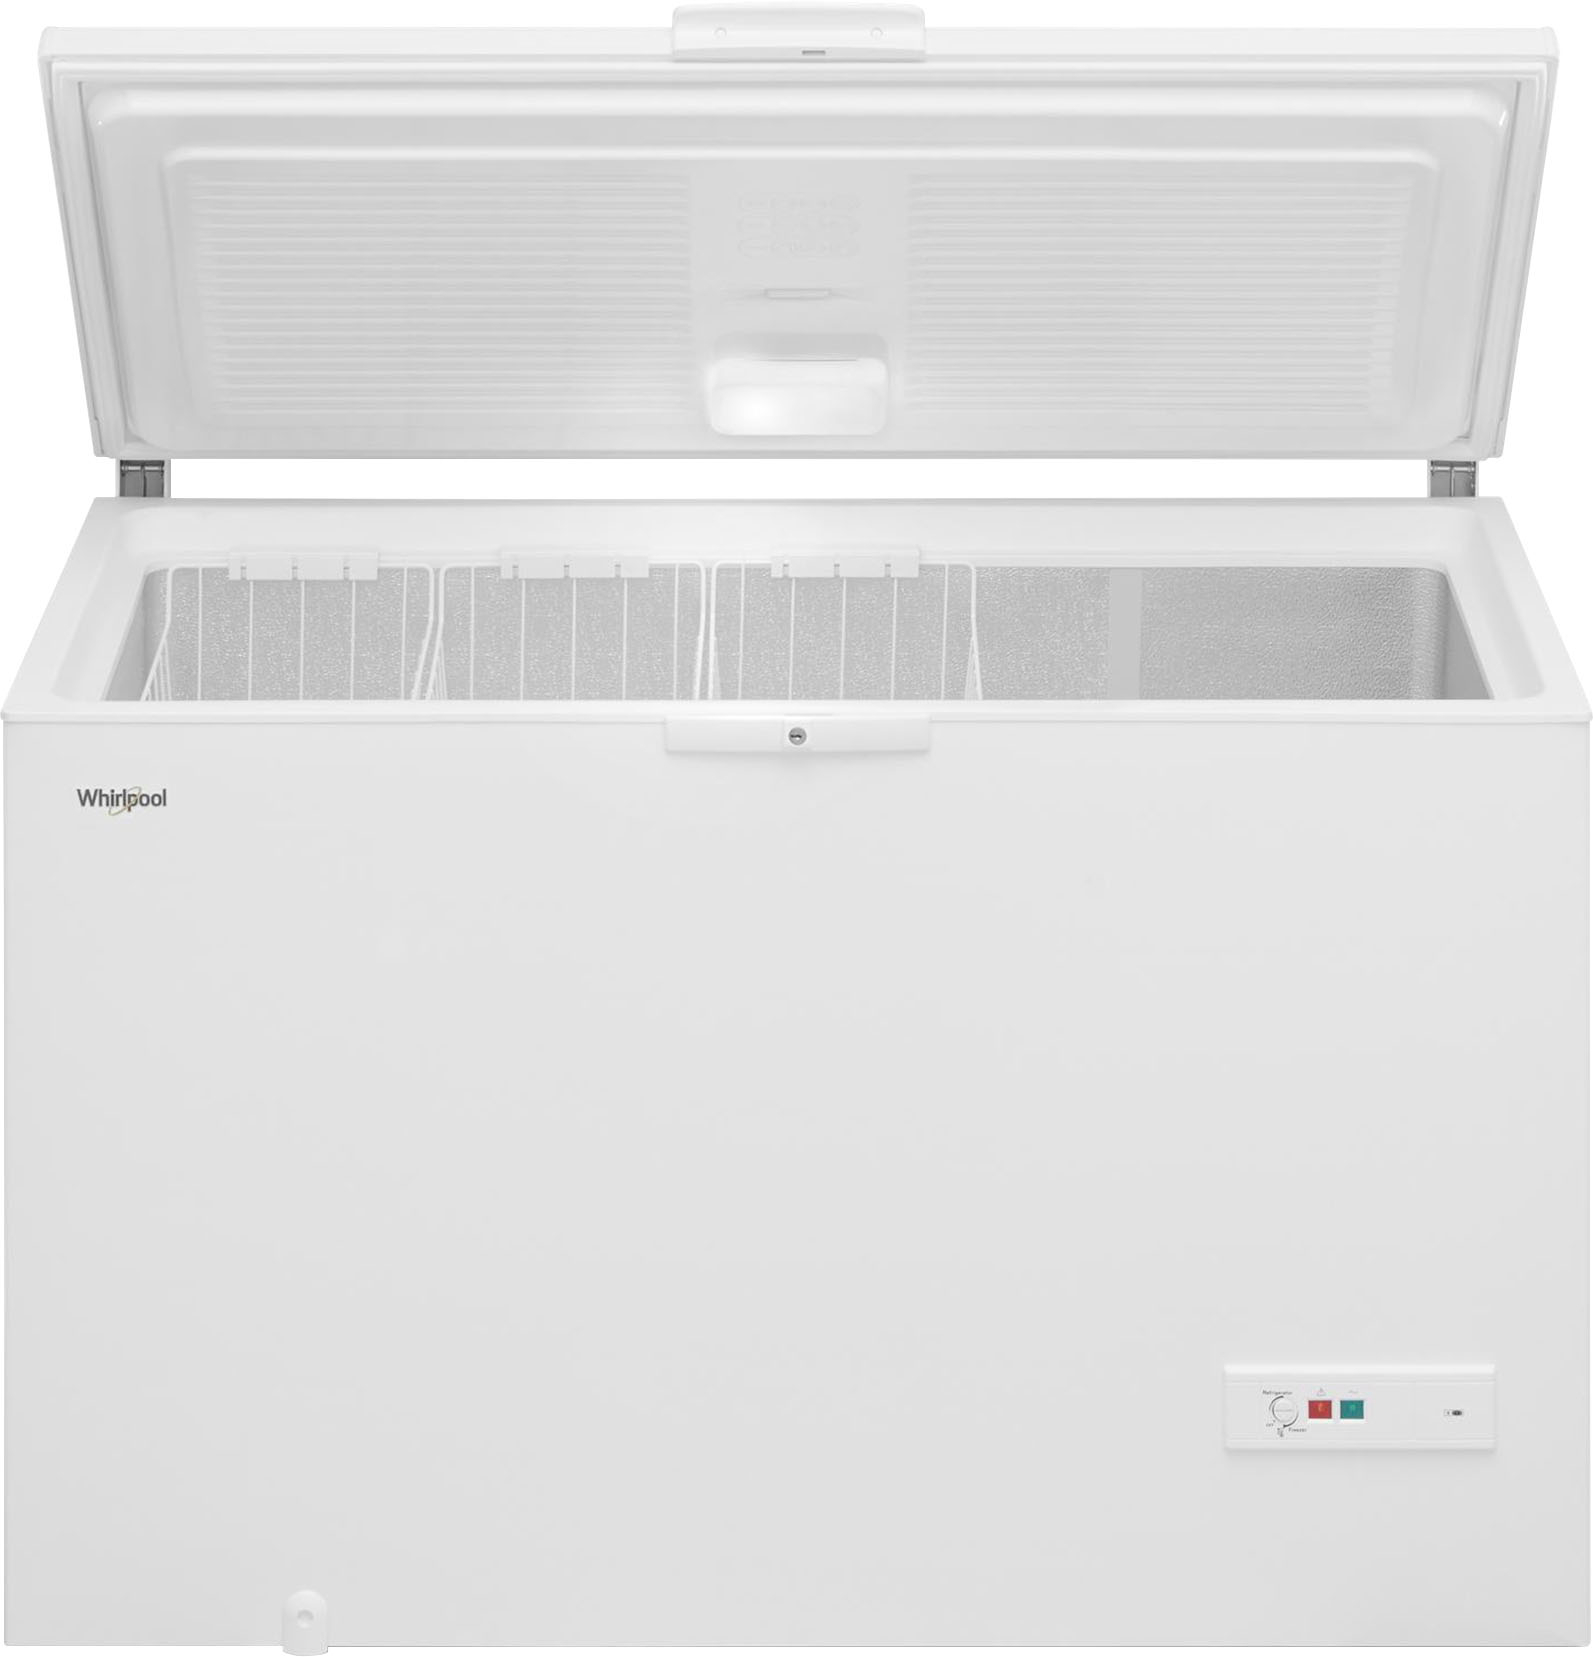 Angle View: Whirlpool - 16 Cu. Ft. Chest Freezer with Basket - White